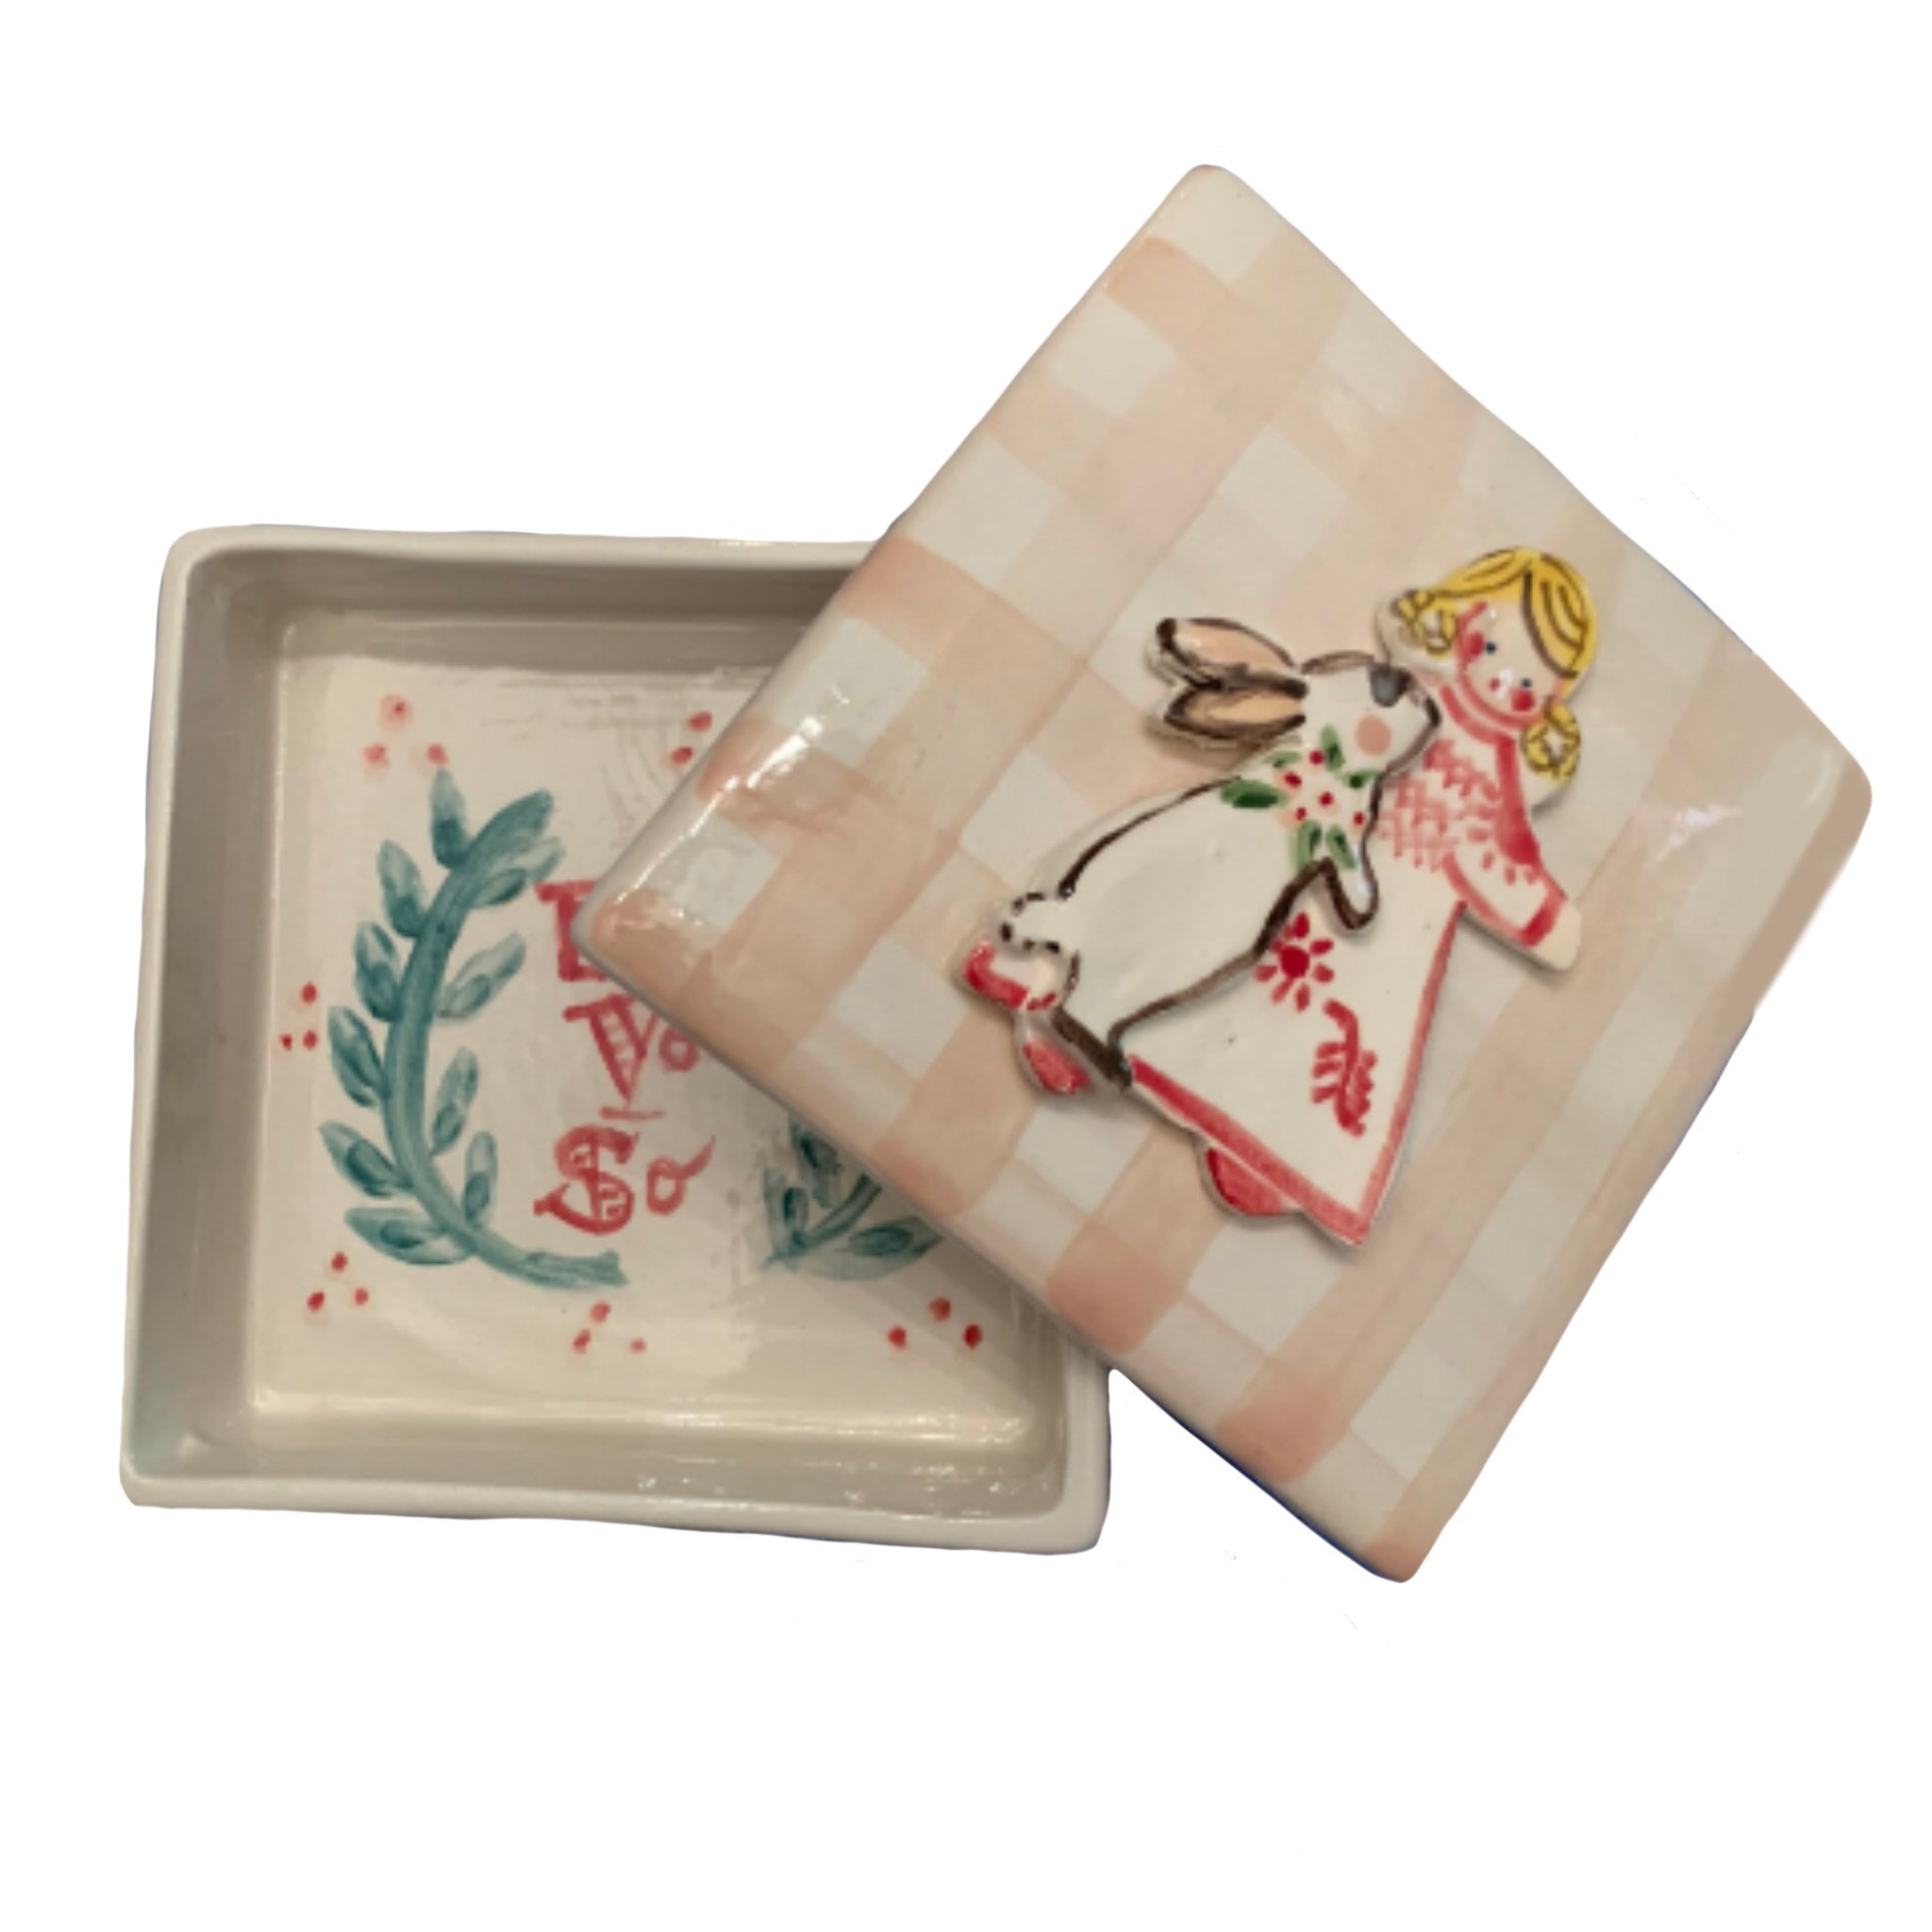 Trinket Box - Gingham Girl and Bunny - Premium  from Tricia Lowenfield Design 